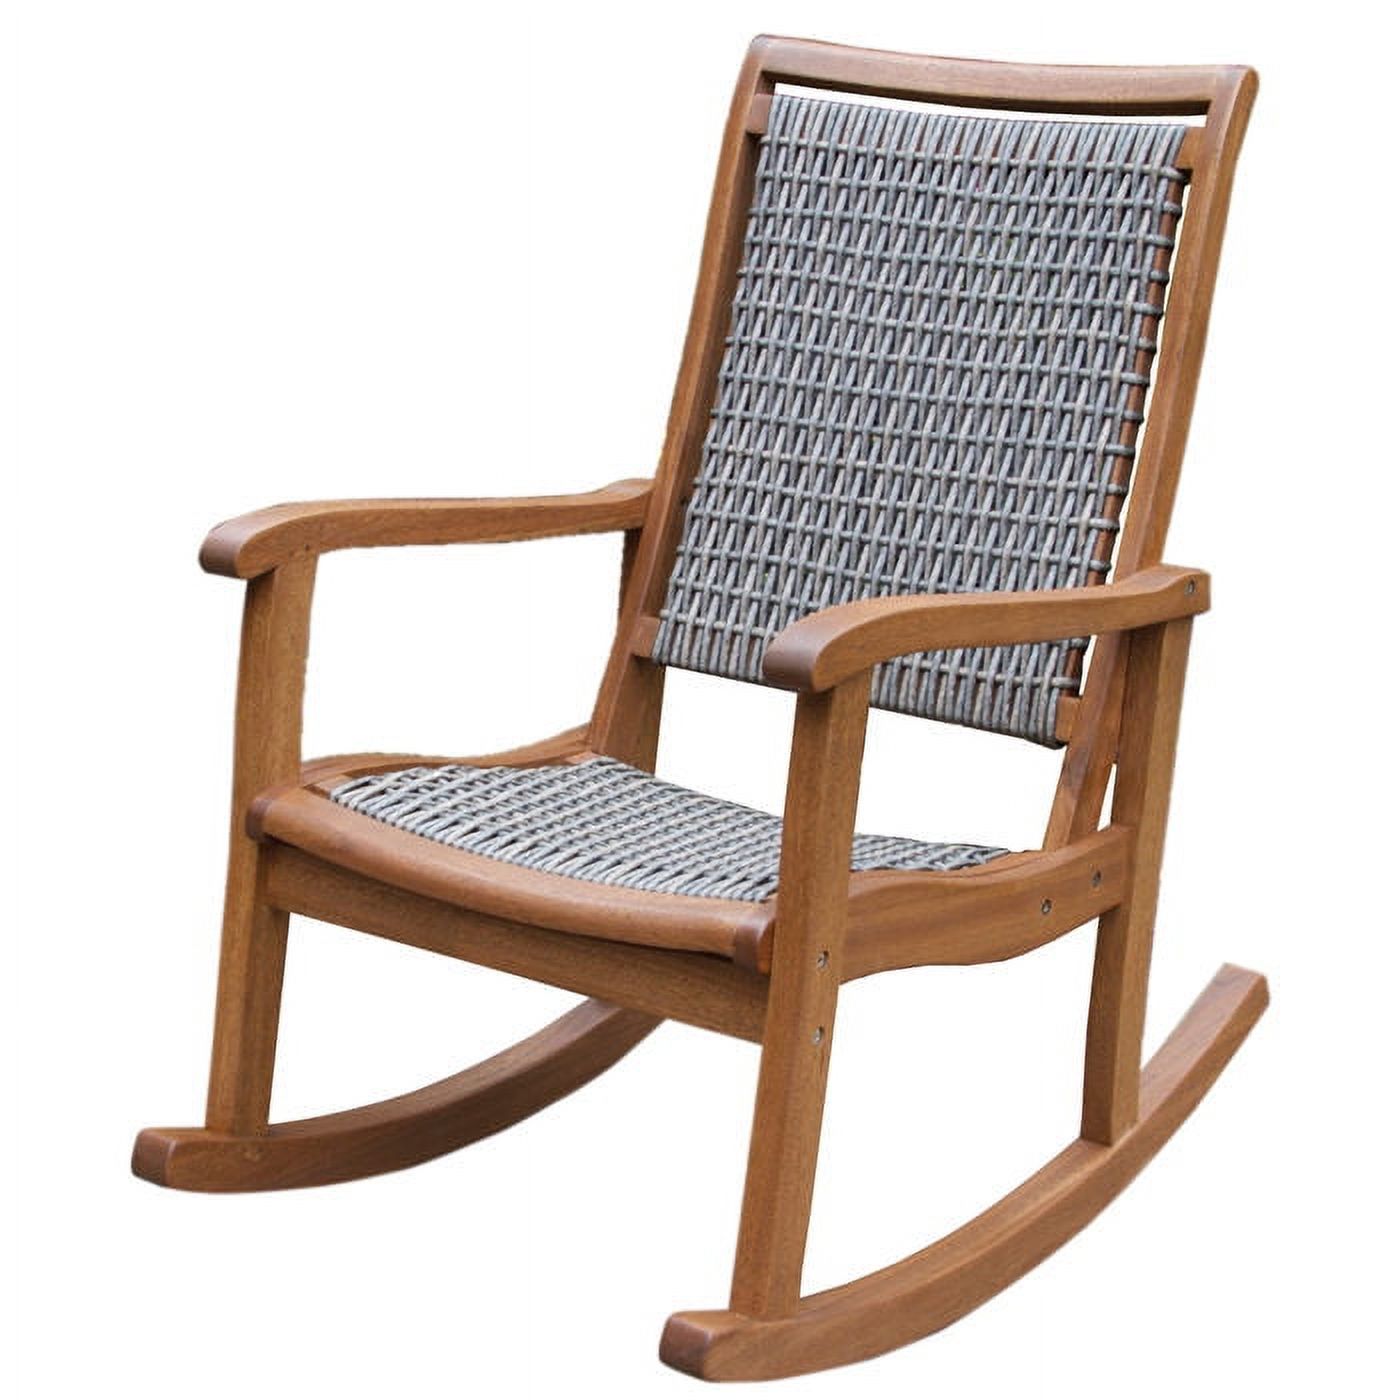 Outdoor Interiors Resin Wicker and Eucalyptus Rocking Chair, Brown and Grey - image 4 of 4